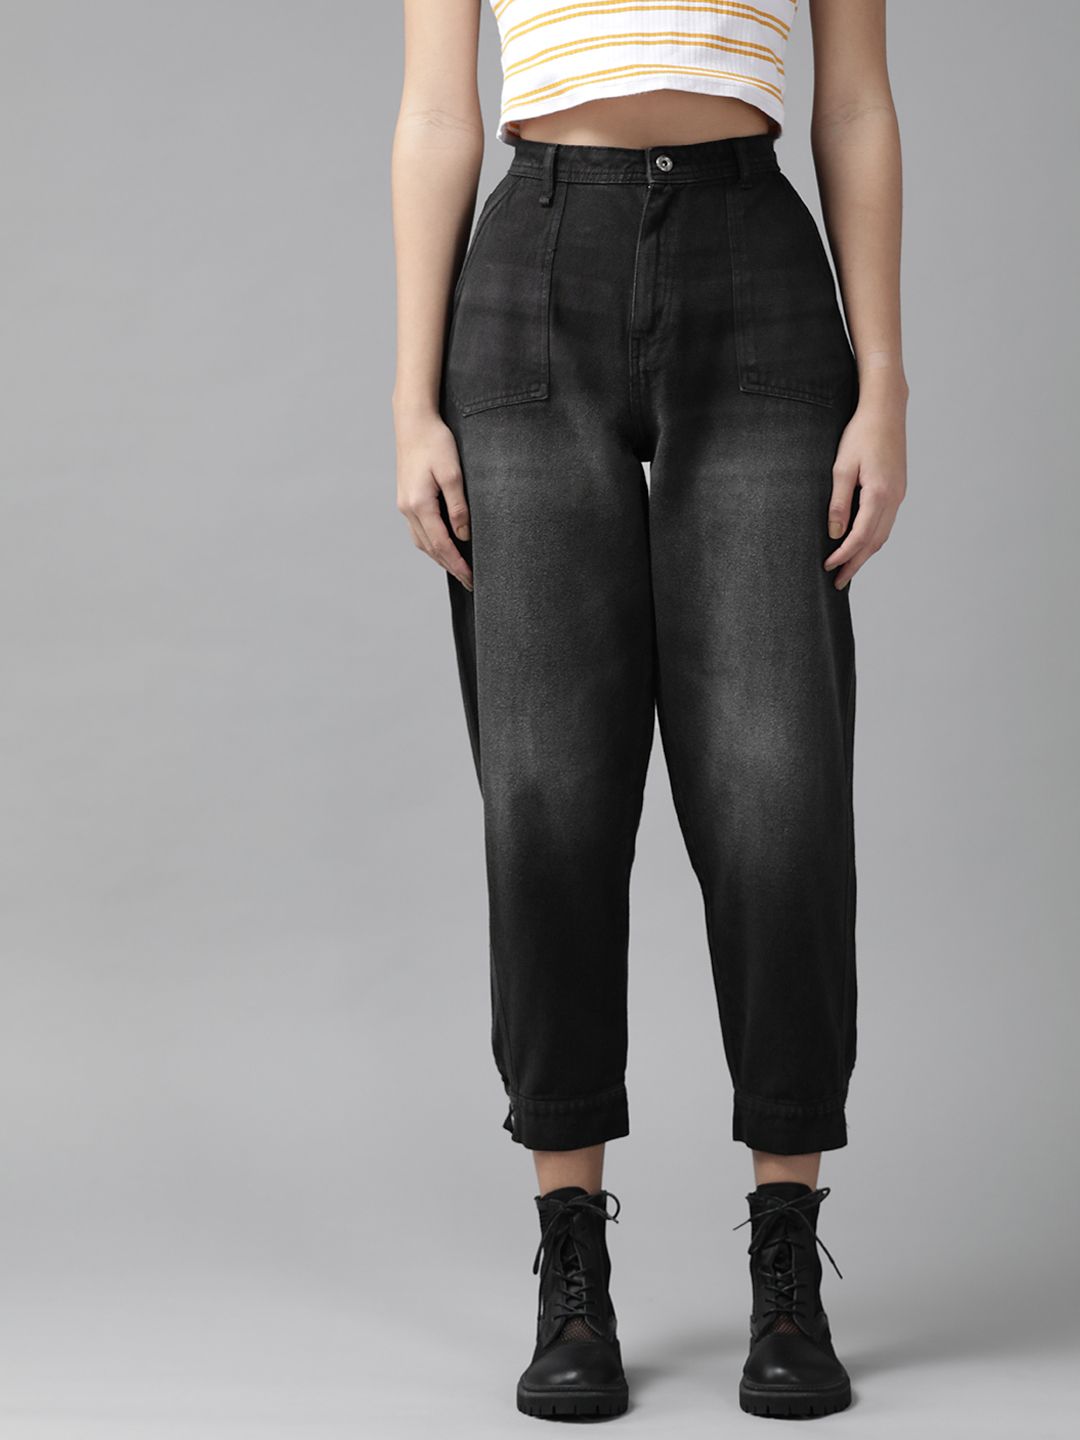 The Roadster Lifestyle Co Women Charcoal Black Pure Cotton Slouchy Fit High-Rise Light Fade Cropped Jeans Price in India